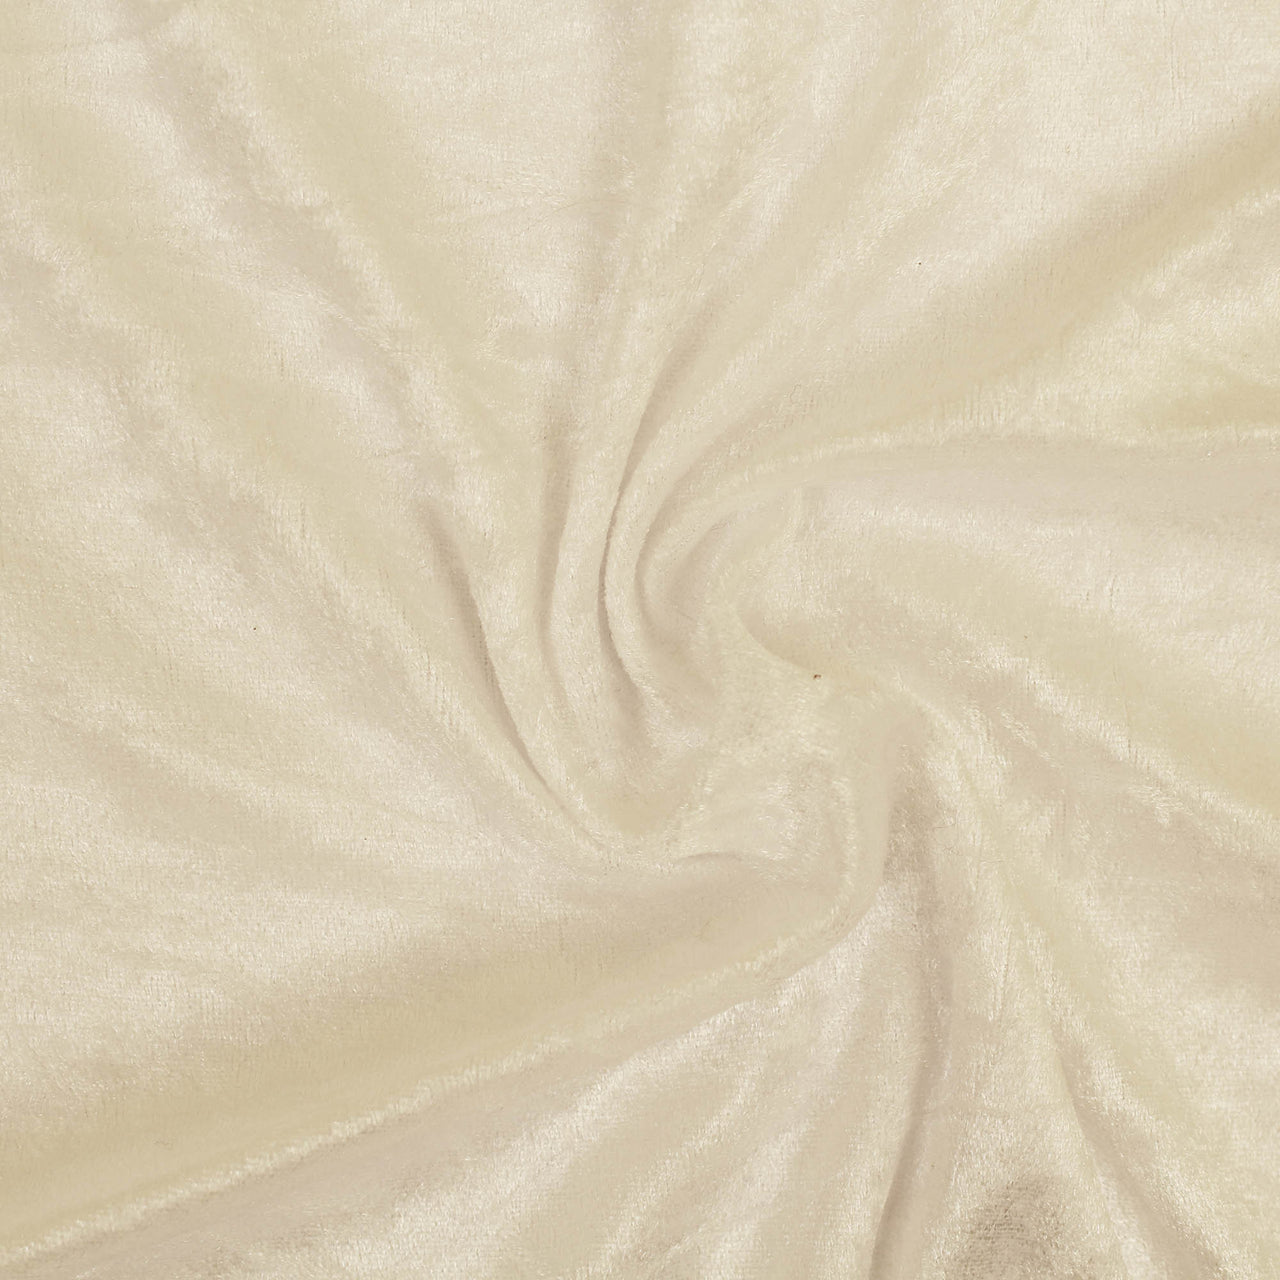 White - Crushed Velvet Velour Fabric - Natural One Way Stretch For Costumes & Drapes